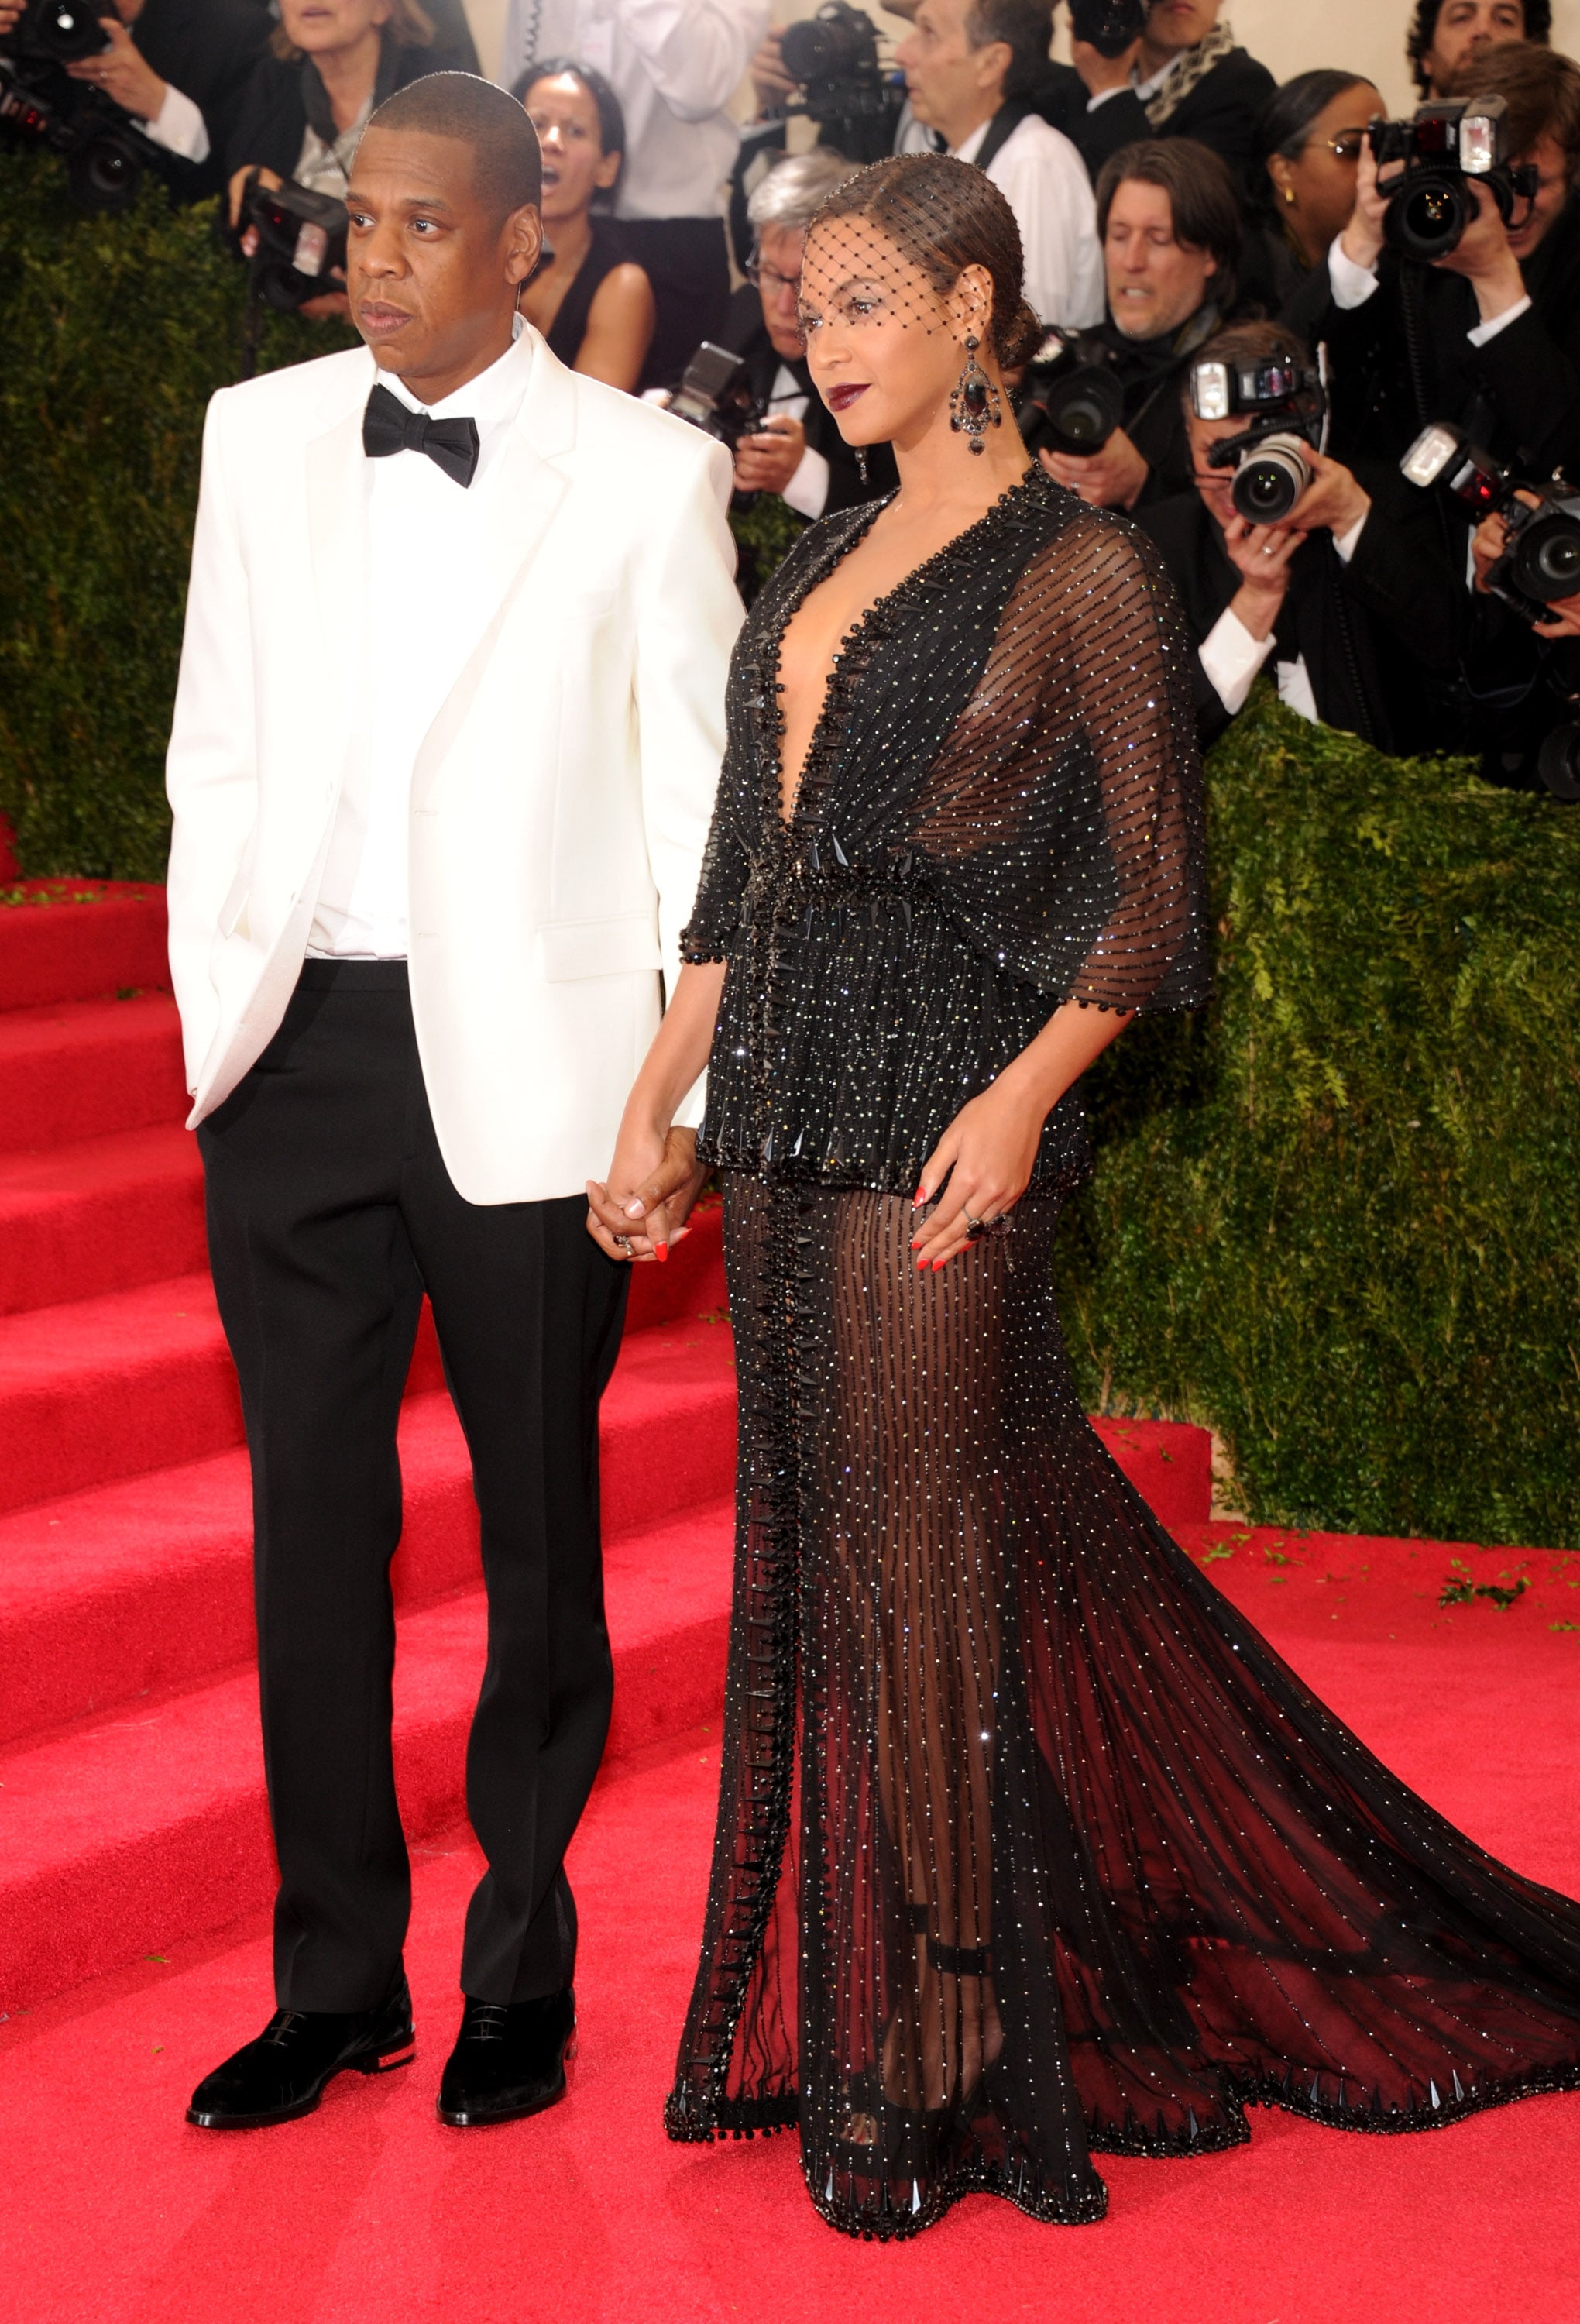 Beyonce And Jay Z At The Met Gala 2014 | Popsugar Celebrity